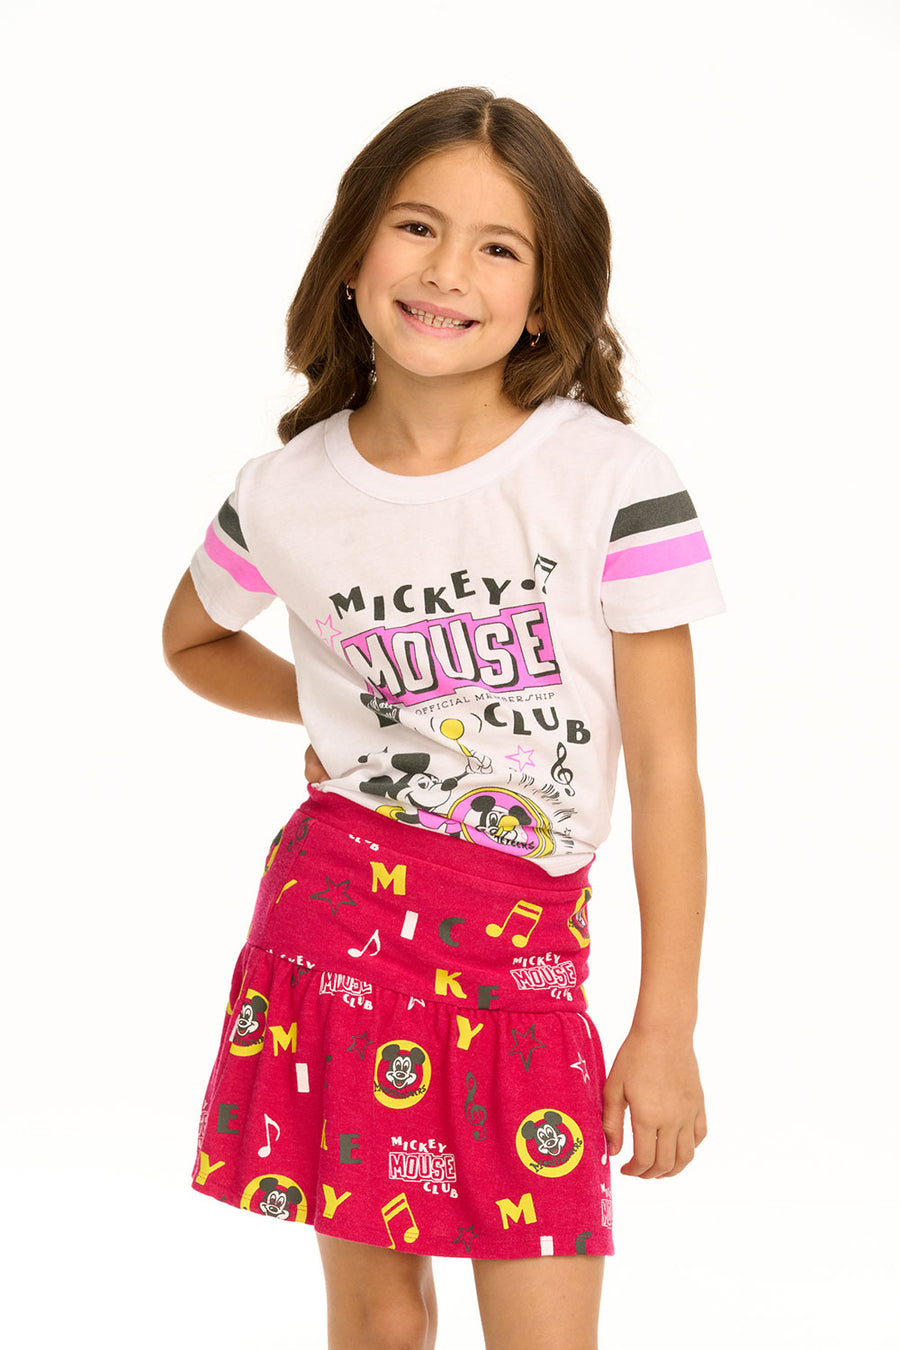 Disney 100 - Mickey Mouse Club Club Tee GIRLS chaserbrand